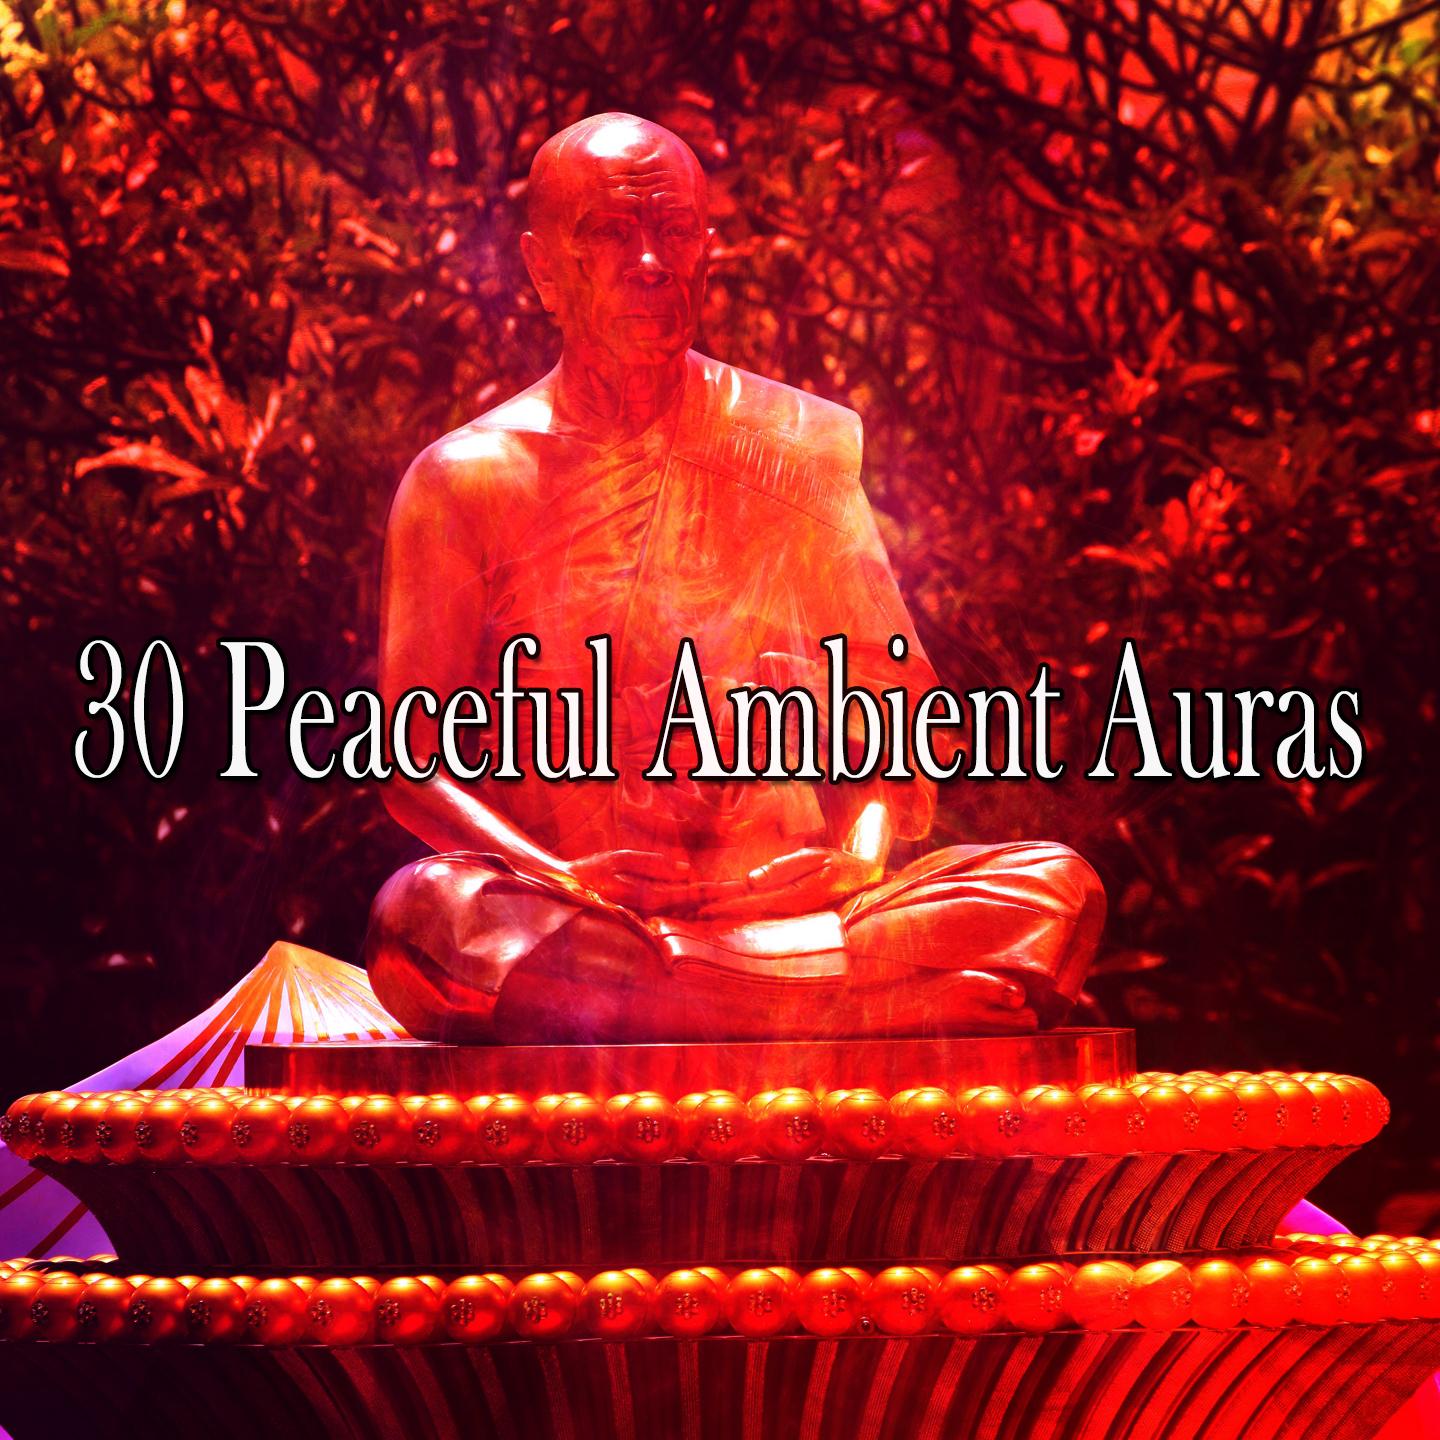 30 Peaceful Ambient Auras